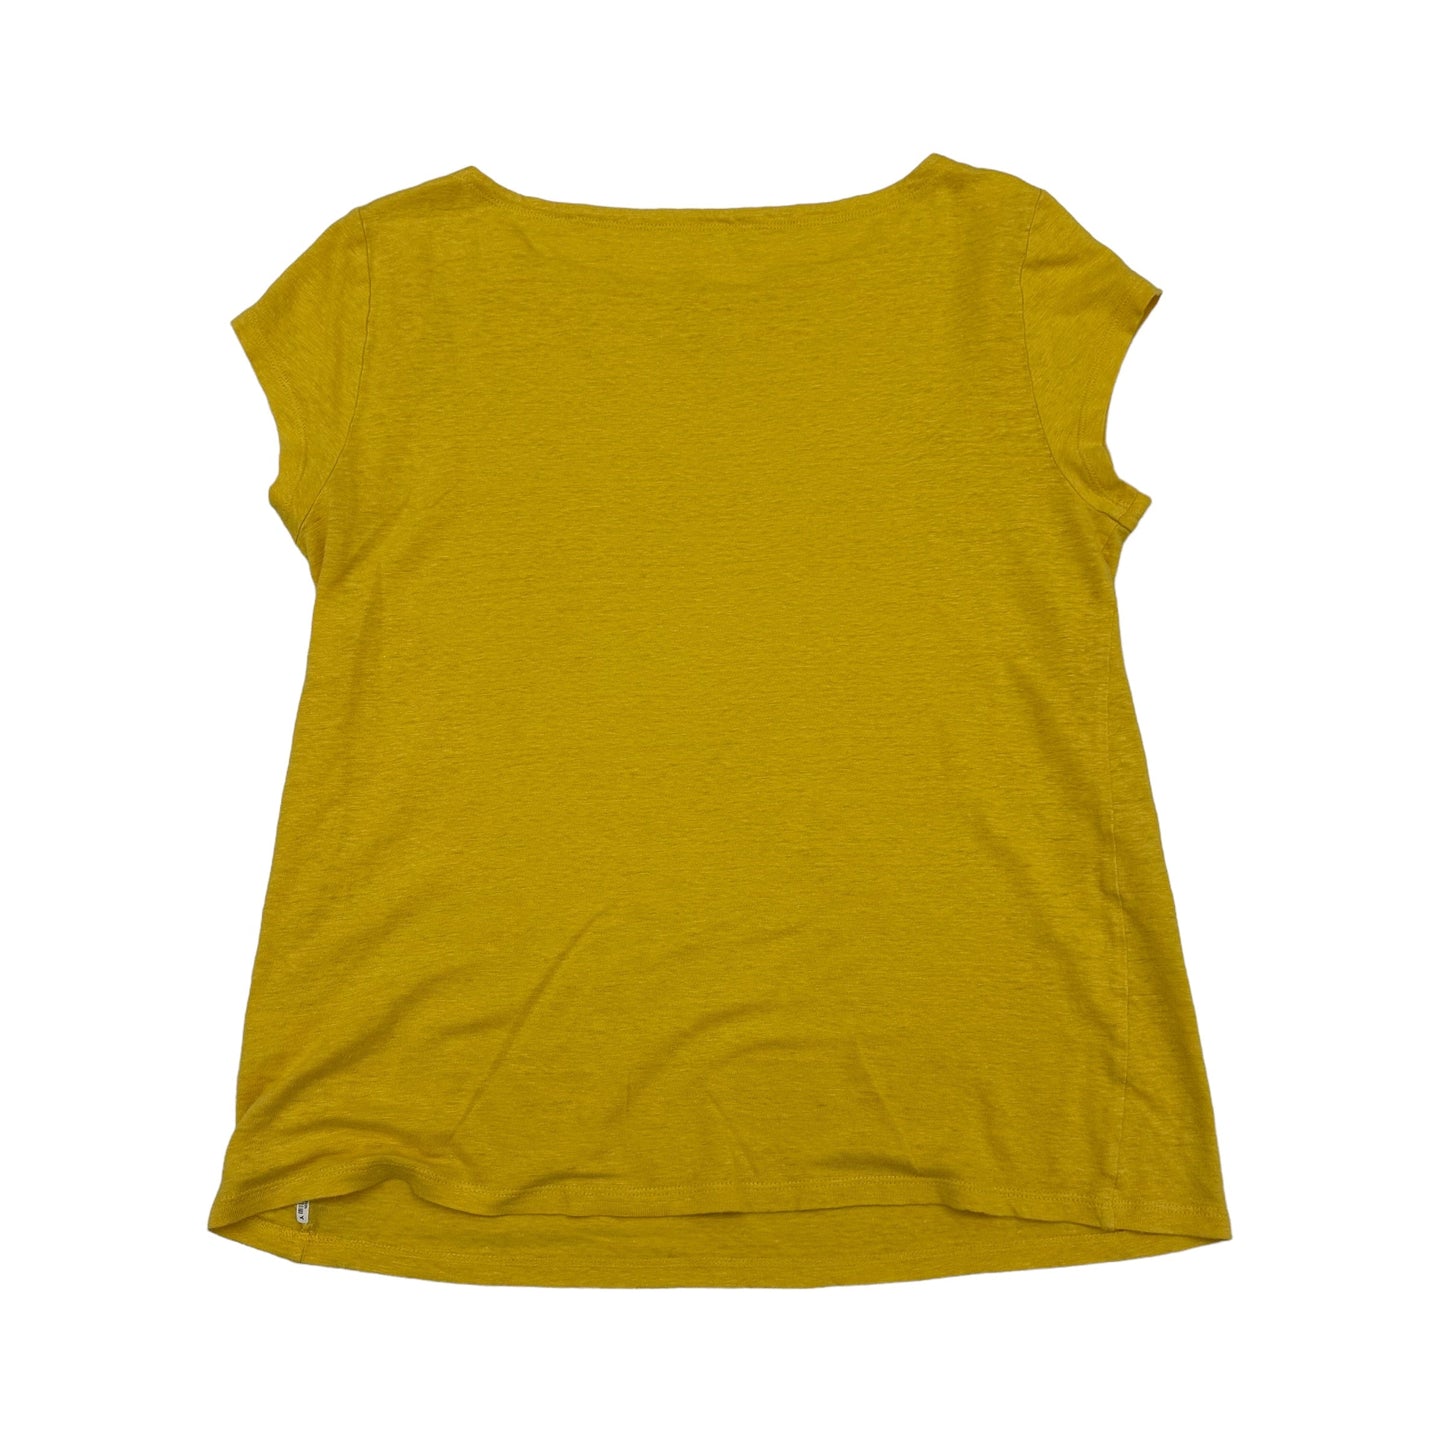 YELLOW    CLOTHES MENTOR TOP SS, Size M